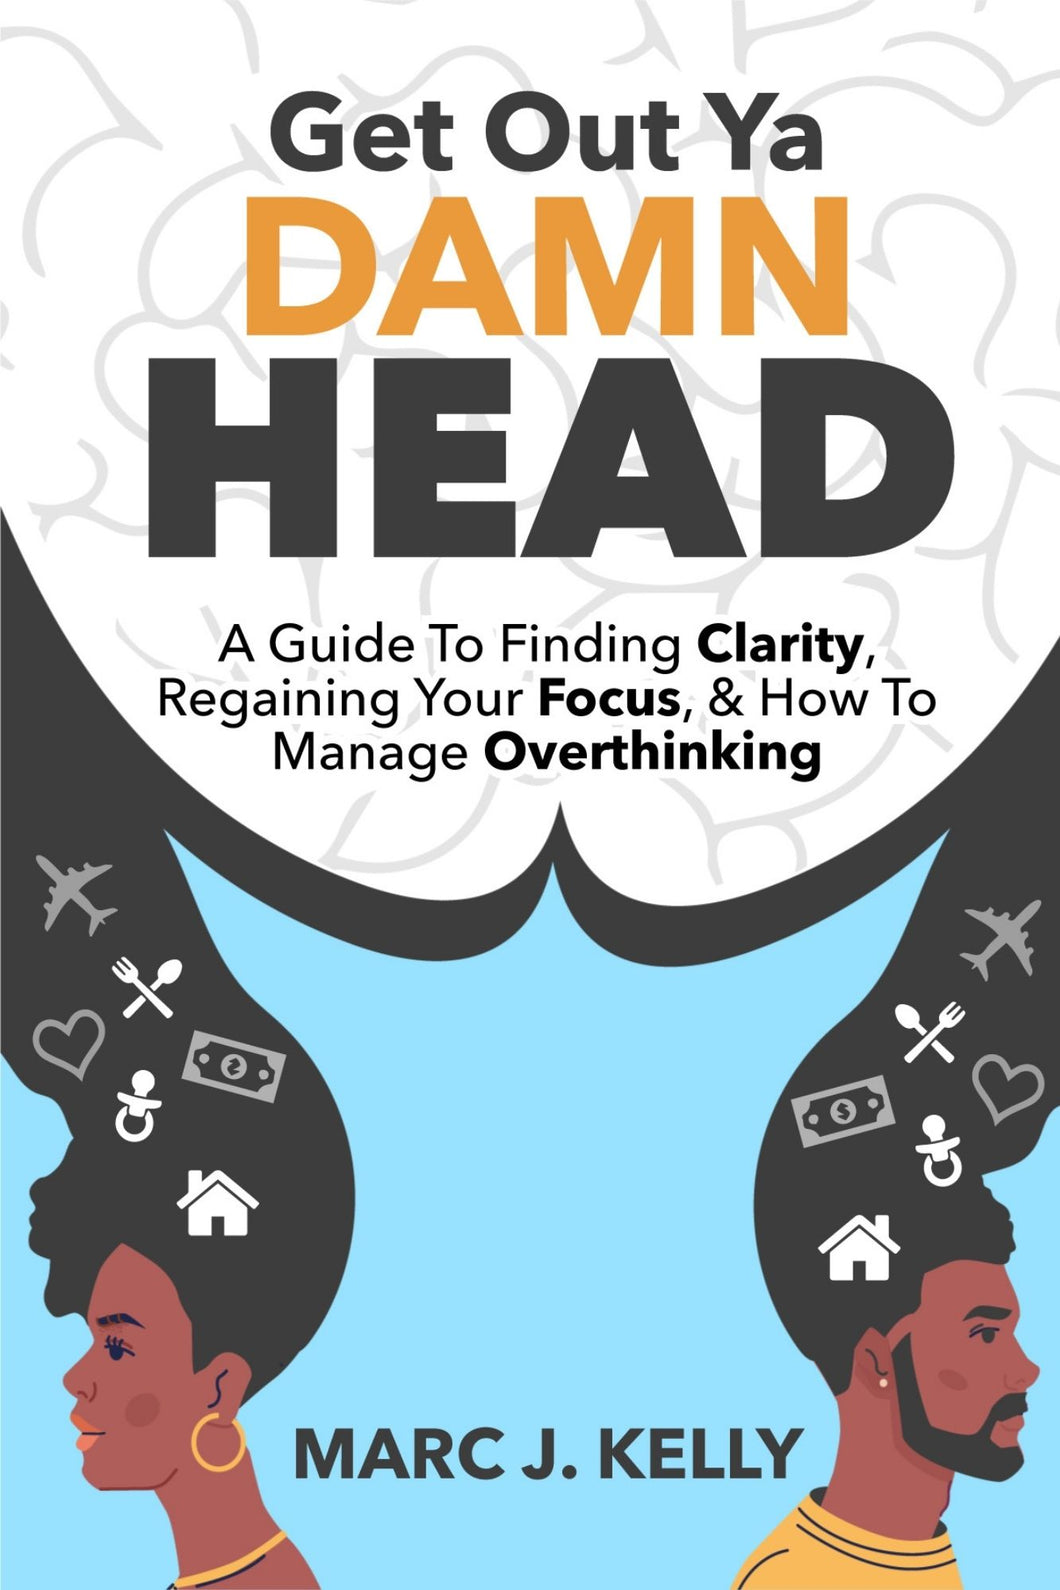 (Signed Copy) Get Out Ya Damn Head: A Guide To Finding Clarity, Regaining Your Focus, & How To Manage Overthinking